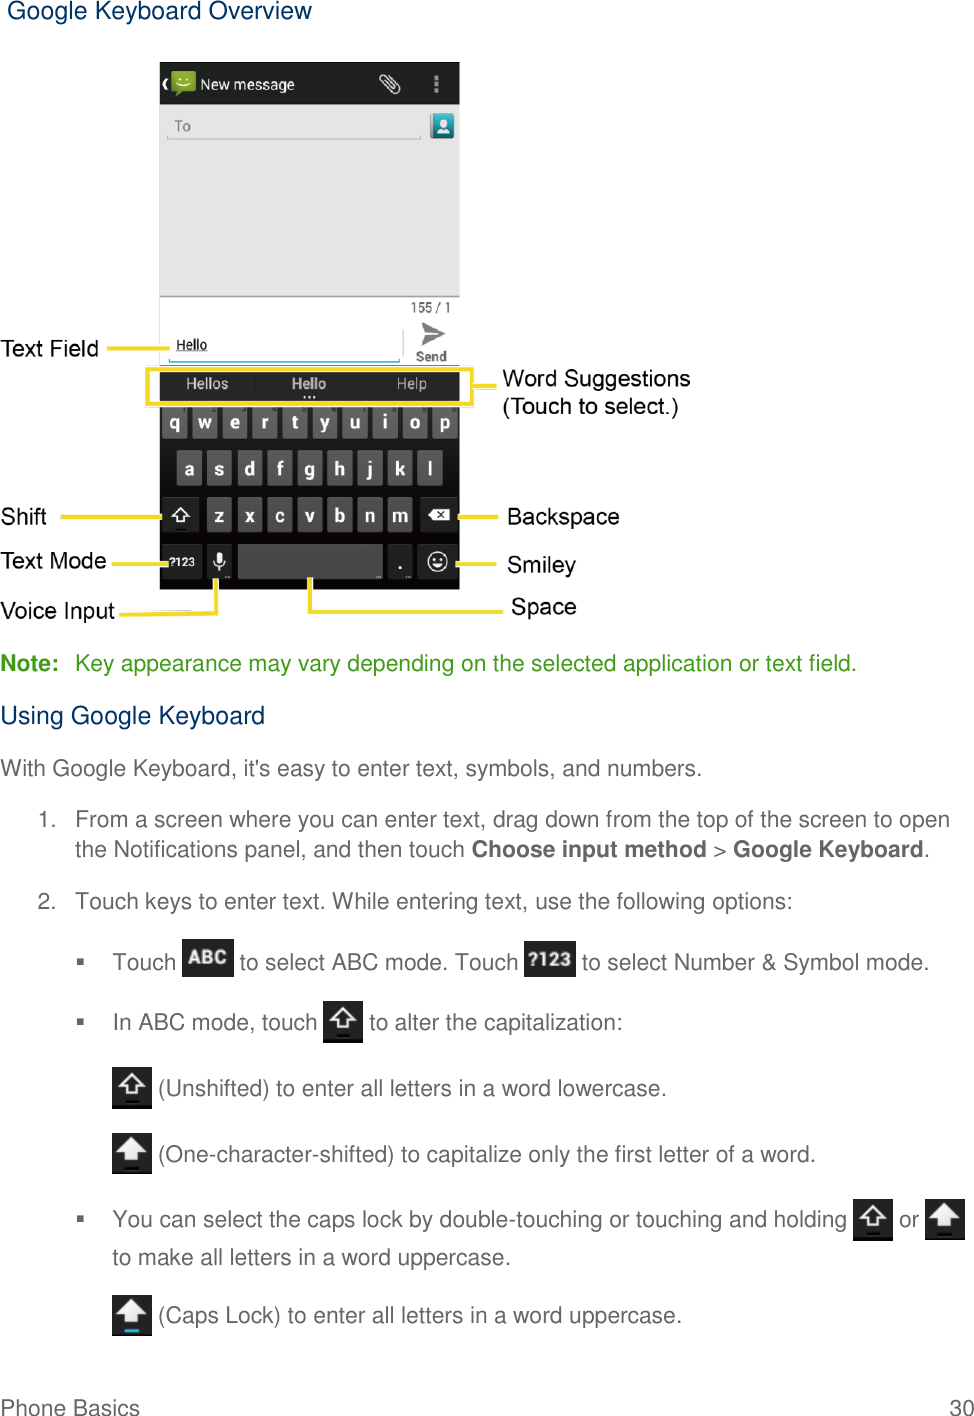 Phone Basics  30  Google Keyboard Overview   Note:  Key appearance may vary depending on the selected application or text field. Using Google Keyboard With Google Keyboard, it&apos;s easy to enter text, symbols, and numbers. 1.  From a screen where you can enter text, drag down from the top of the screen to open the Notifications panel, and then touch Choose input method &gt; Google Keyboard. 2.  Touch keys to enter text. While entering text, use the following options:   Touch   to select ABC mode. Touch   to select Number &amp; Symbol mode.   In ABC mode, touch   to alter the capitalization:  (Unshifted) to enter all letters in a word lowercase.  (One-character-shifted) to capitalize only the first letter of a word.   You can select the caps lock by double-touching or touching and holding   or   to make all letters in a word uppercase.  (Caps Lock) to enter all letters in a word uppercase. 